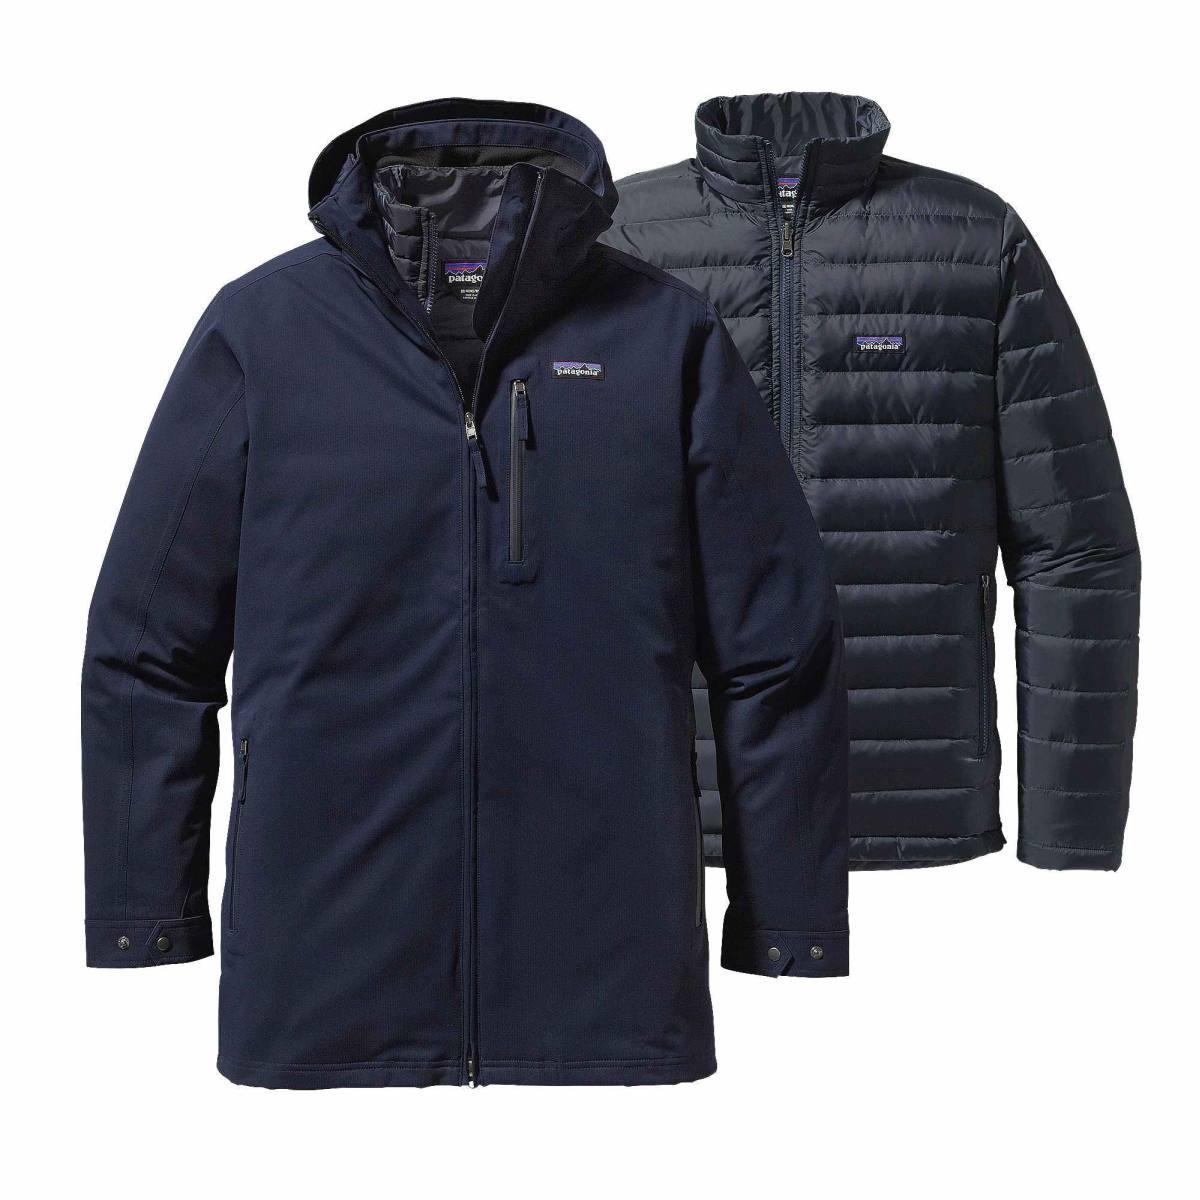 Giacca invernale uomo Tres 3 in 1 Parka navy blue PATAGONIA